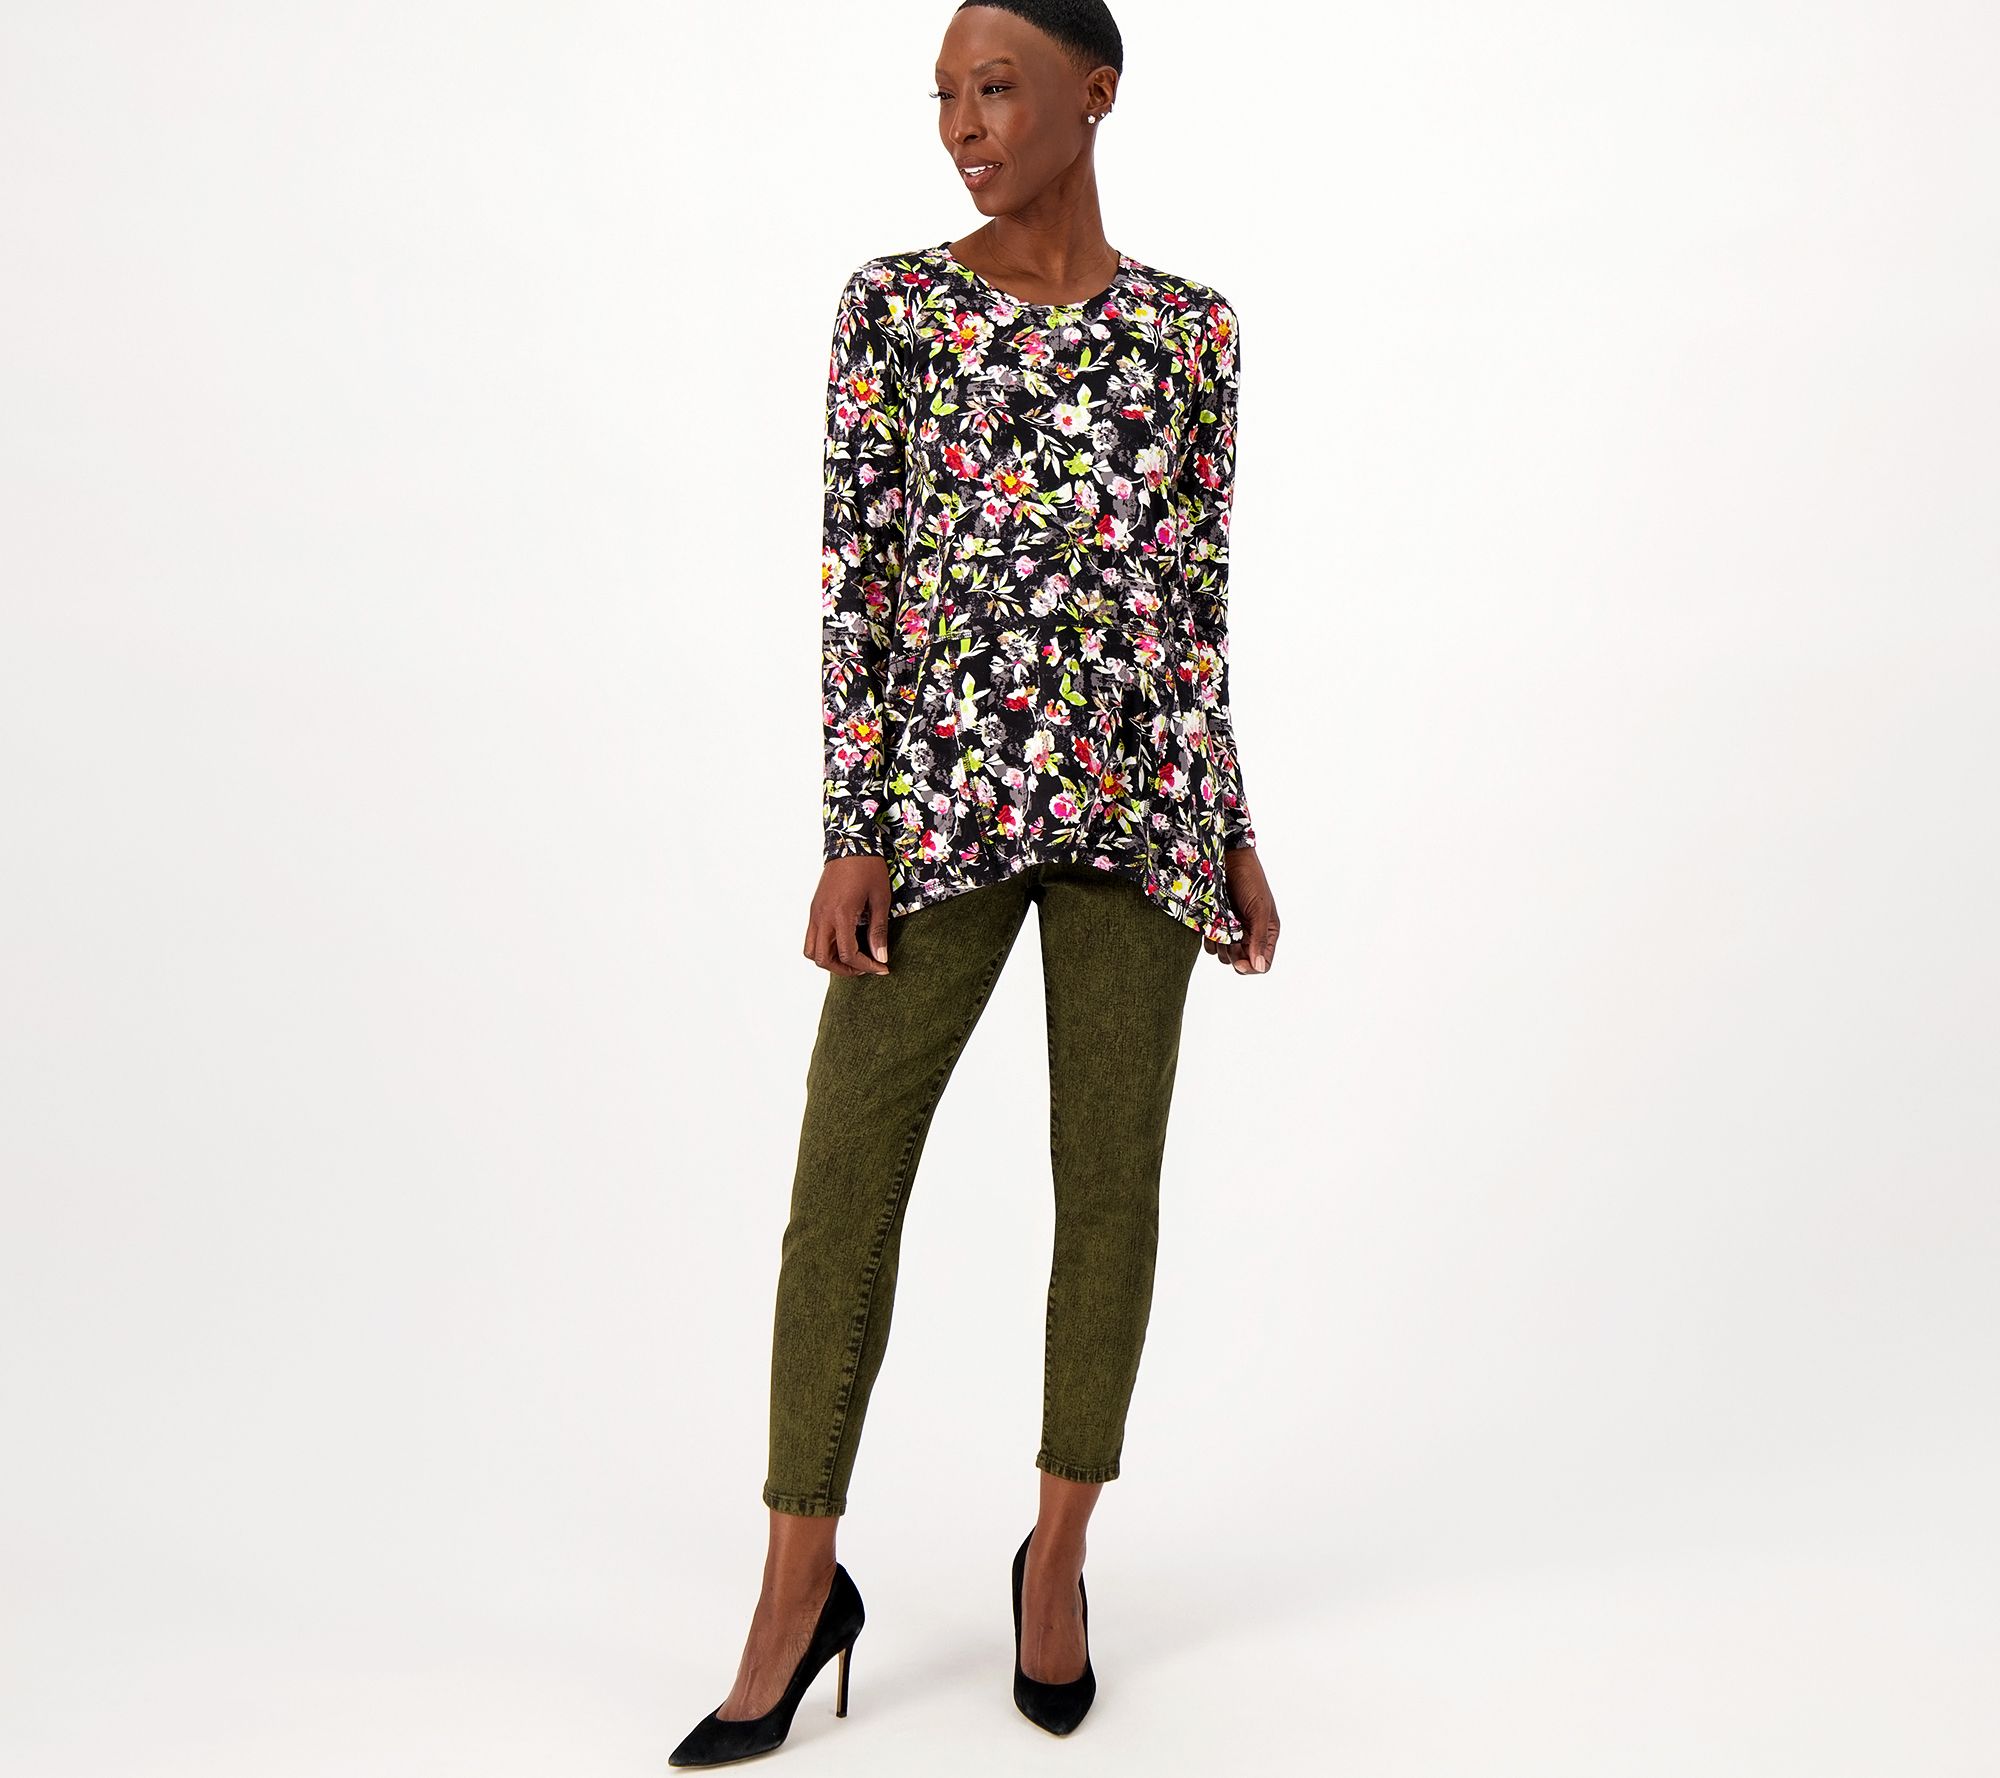 LOGO By Lori Goldstein Printed Rayon 230 Top With Contrast, 42% OFF